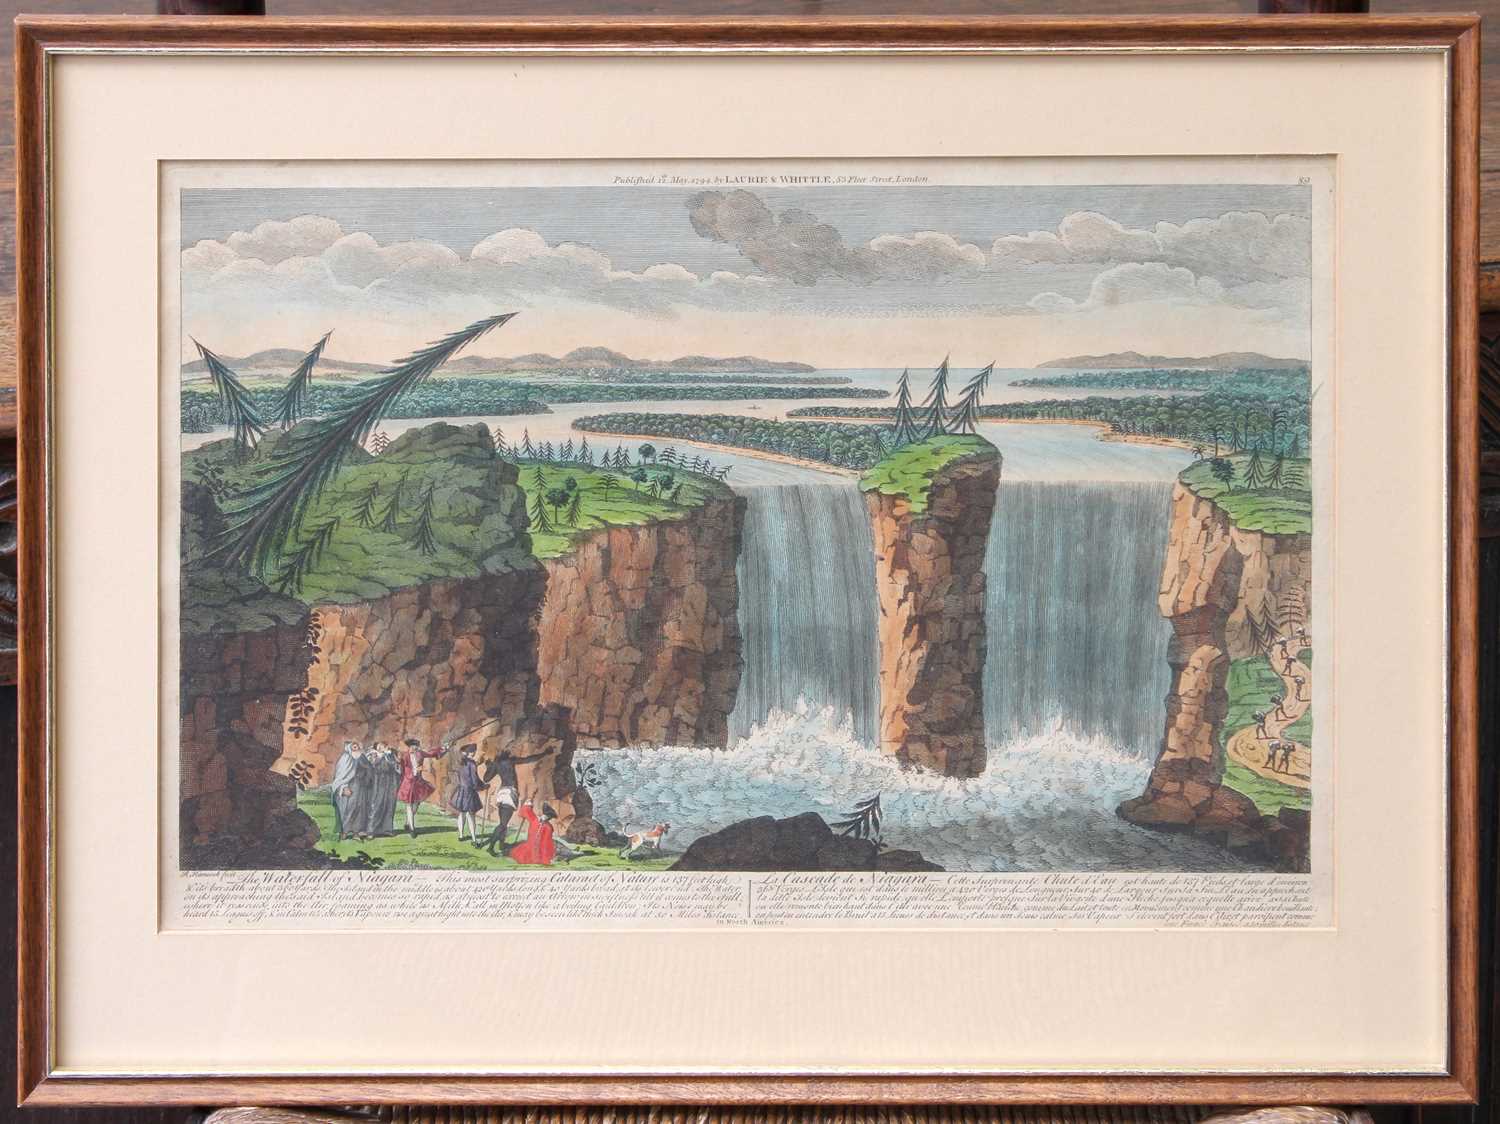 Robert Hancock (1730-1817) "The Waterfall of Niagara" Published 12th May 1794 by Laurie & Whittle, - Image 2 of 2